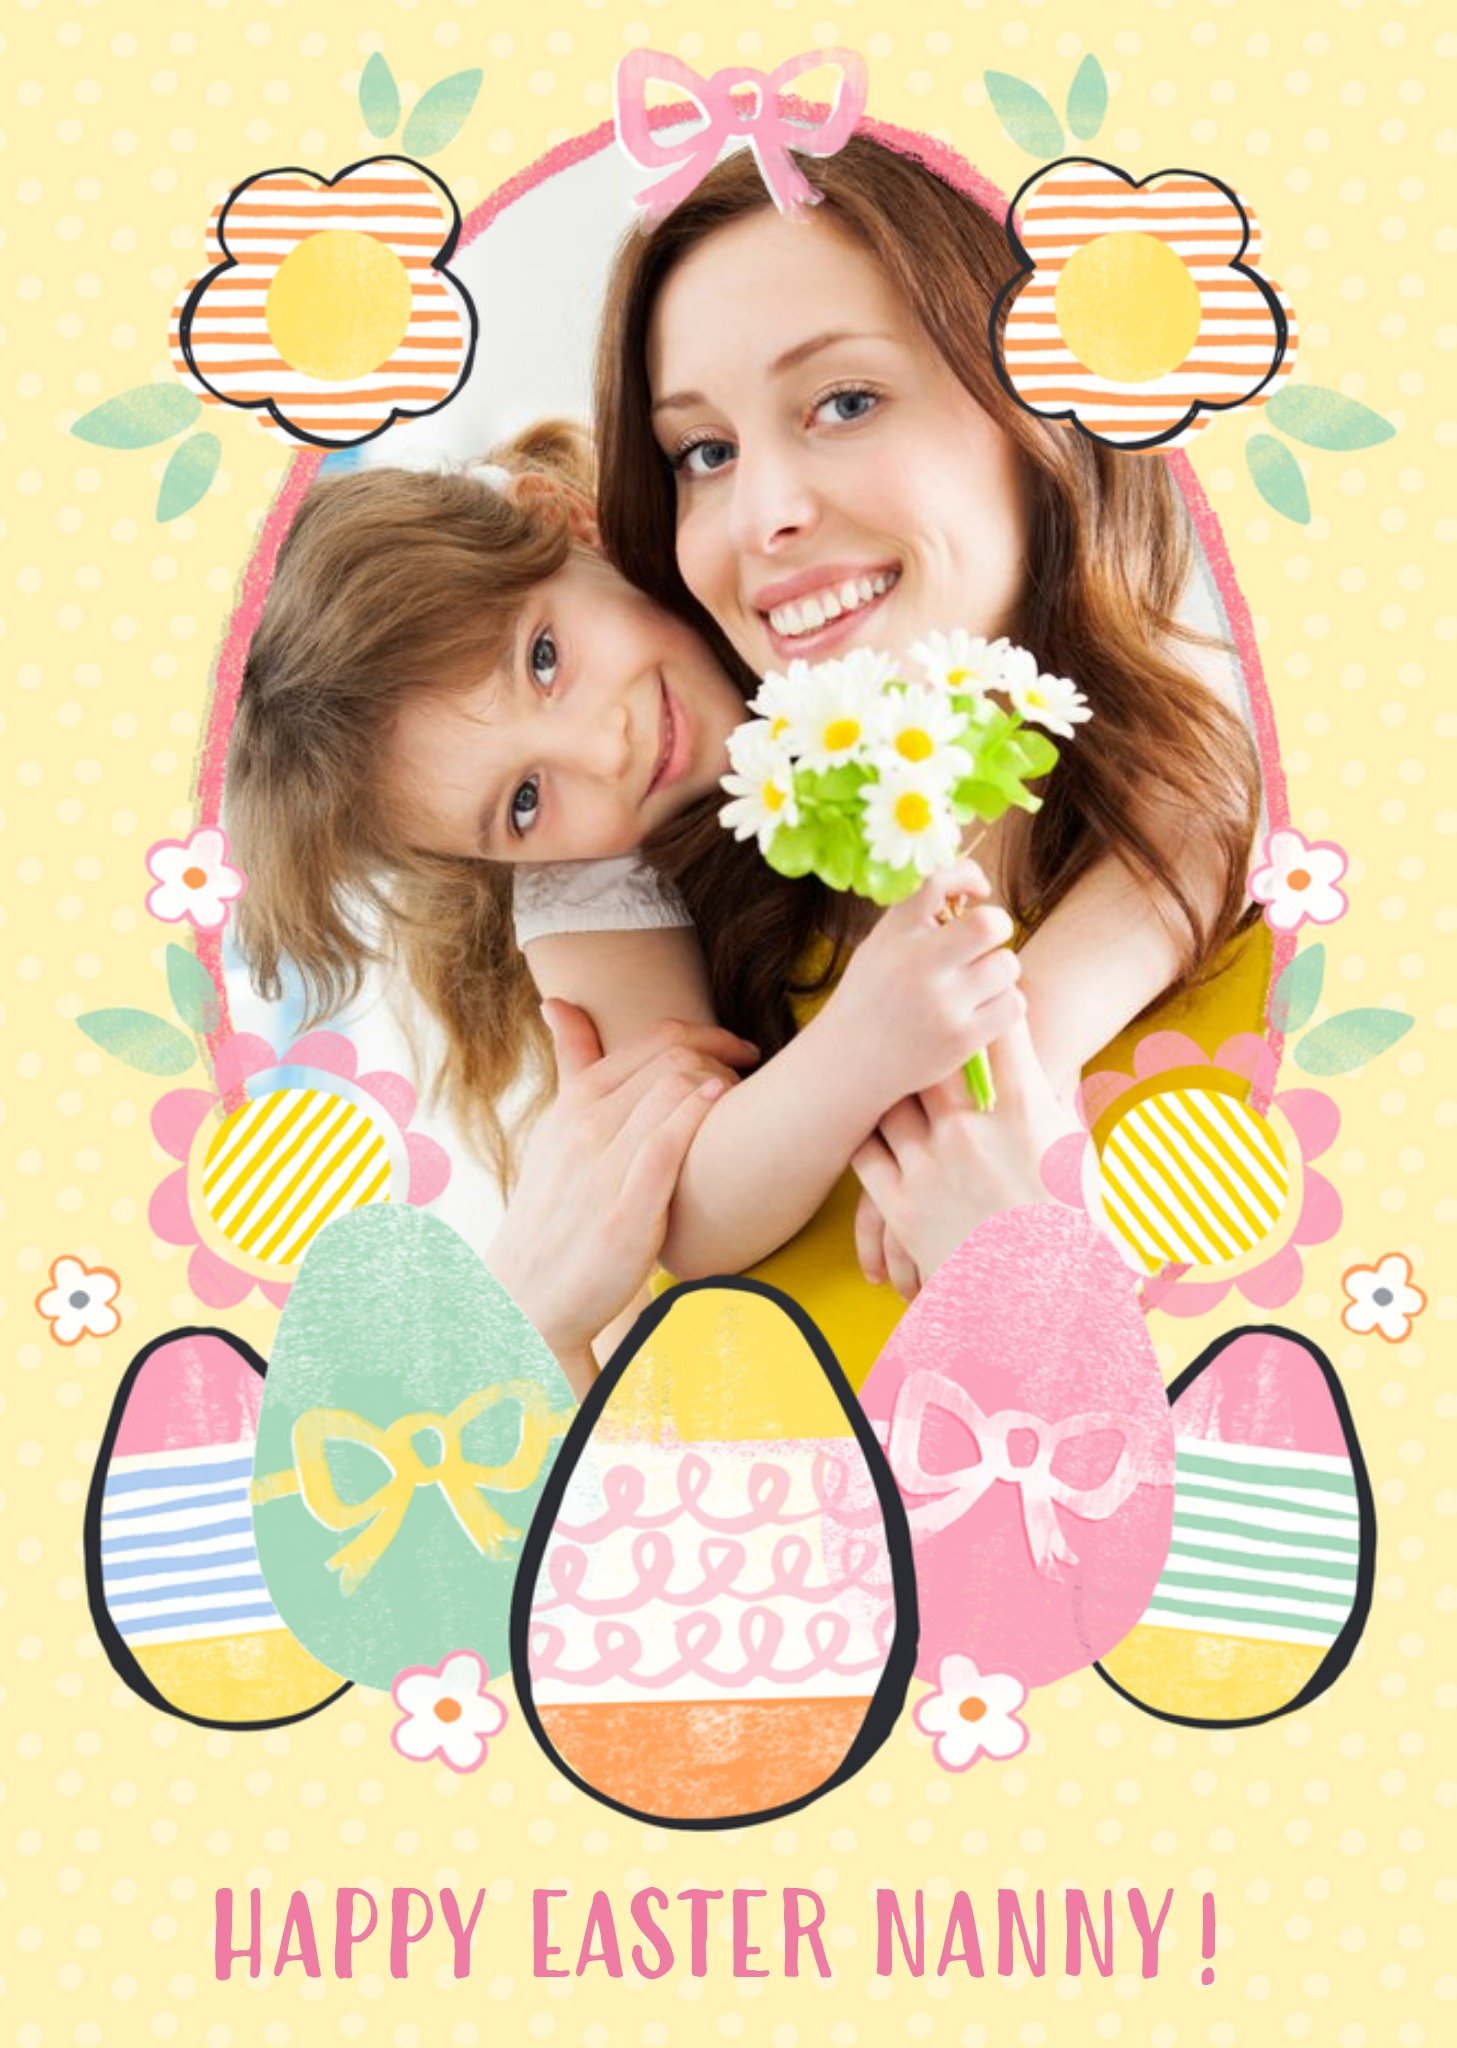 Moonpig Pastel Flowers And Eggs Happy Easter Photo Card, Large